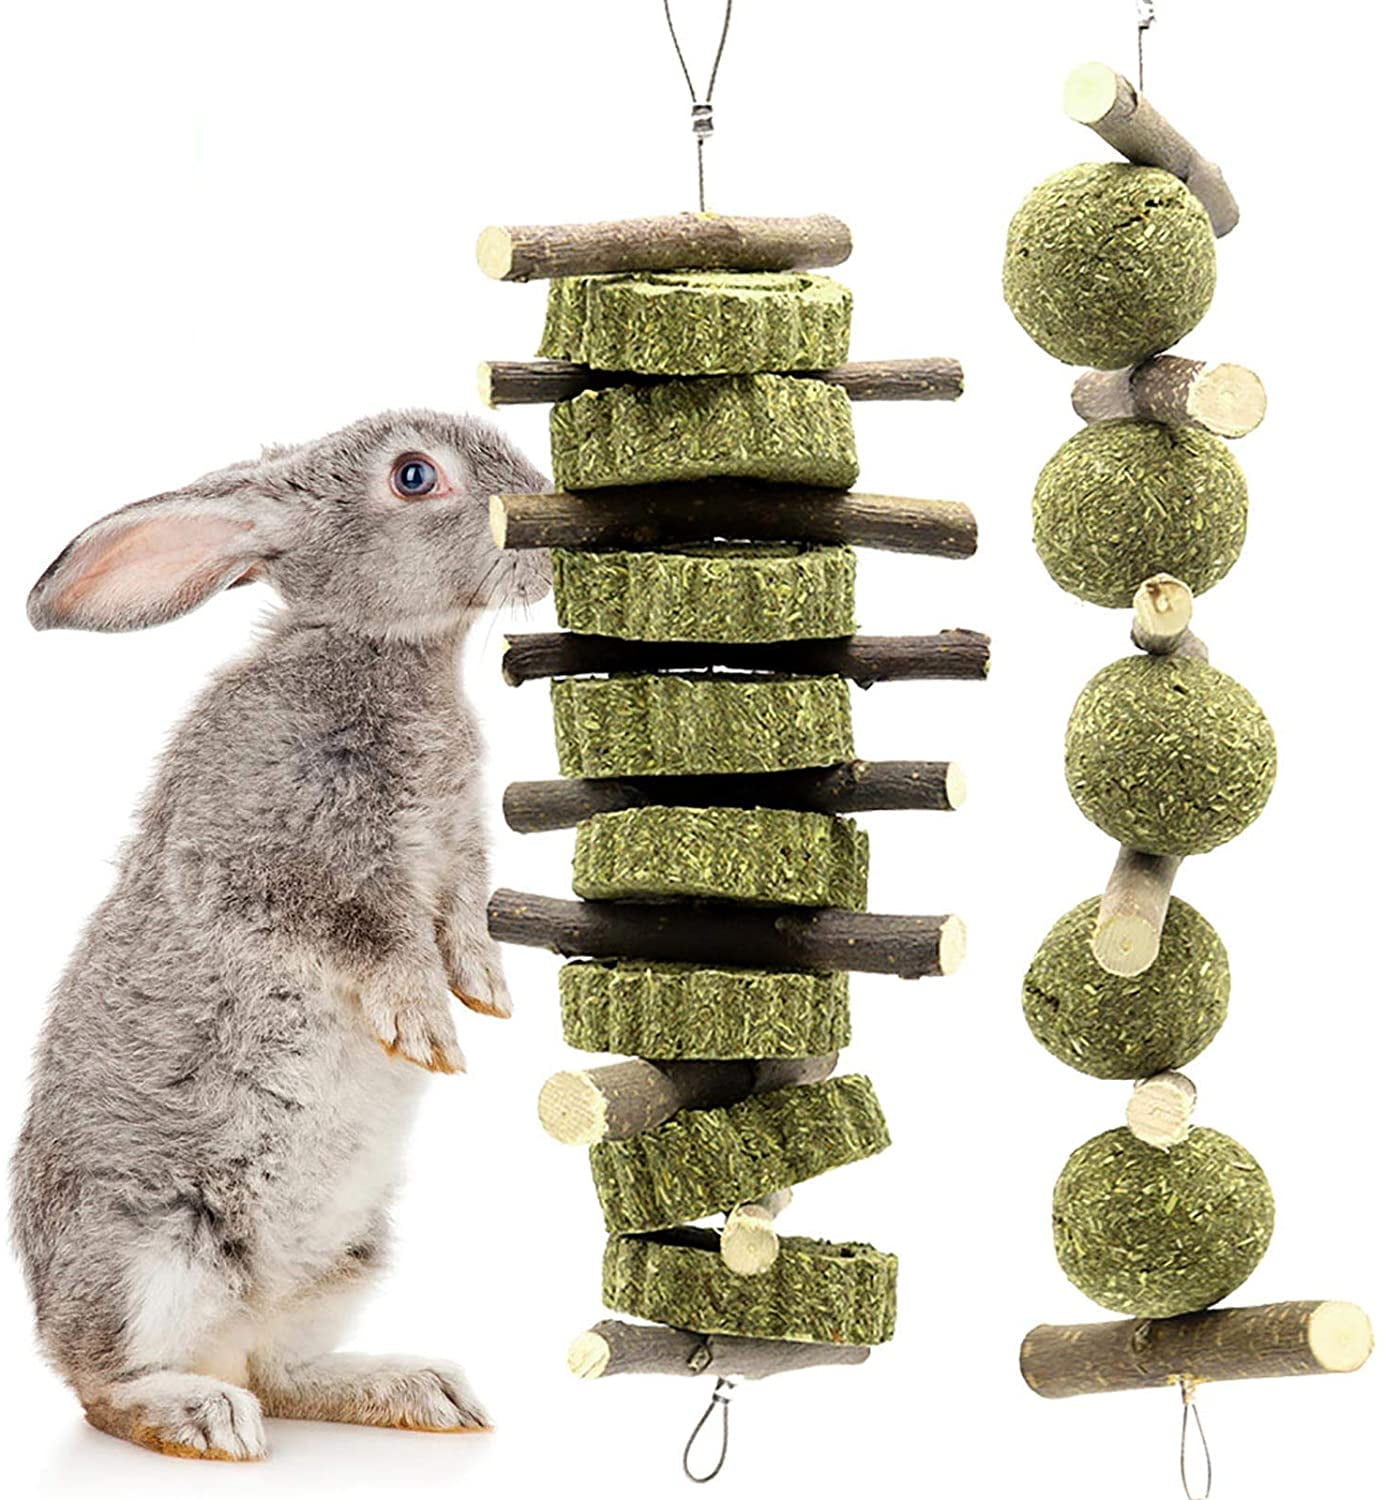 Ogquaton Pet Chew Toy Natural Grass Ball with Bell for Rabbit Hamster Guinea Pig Tooth Cleaning Creative and Useful